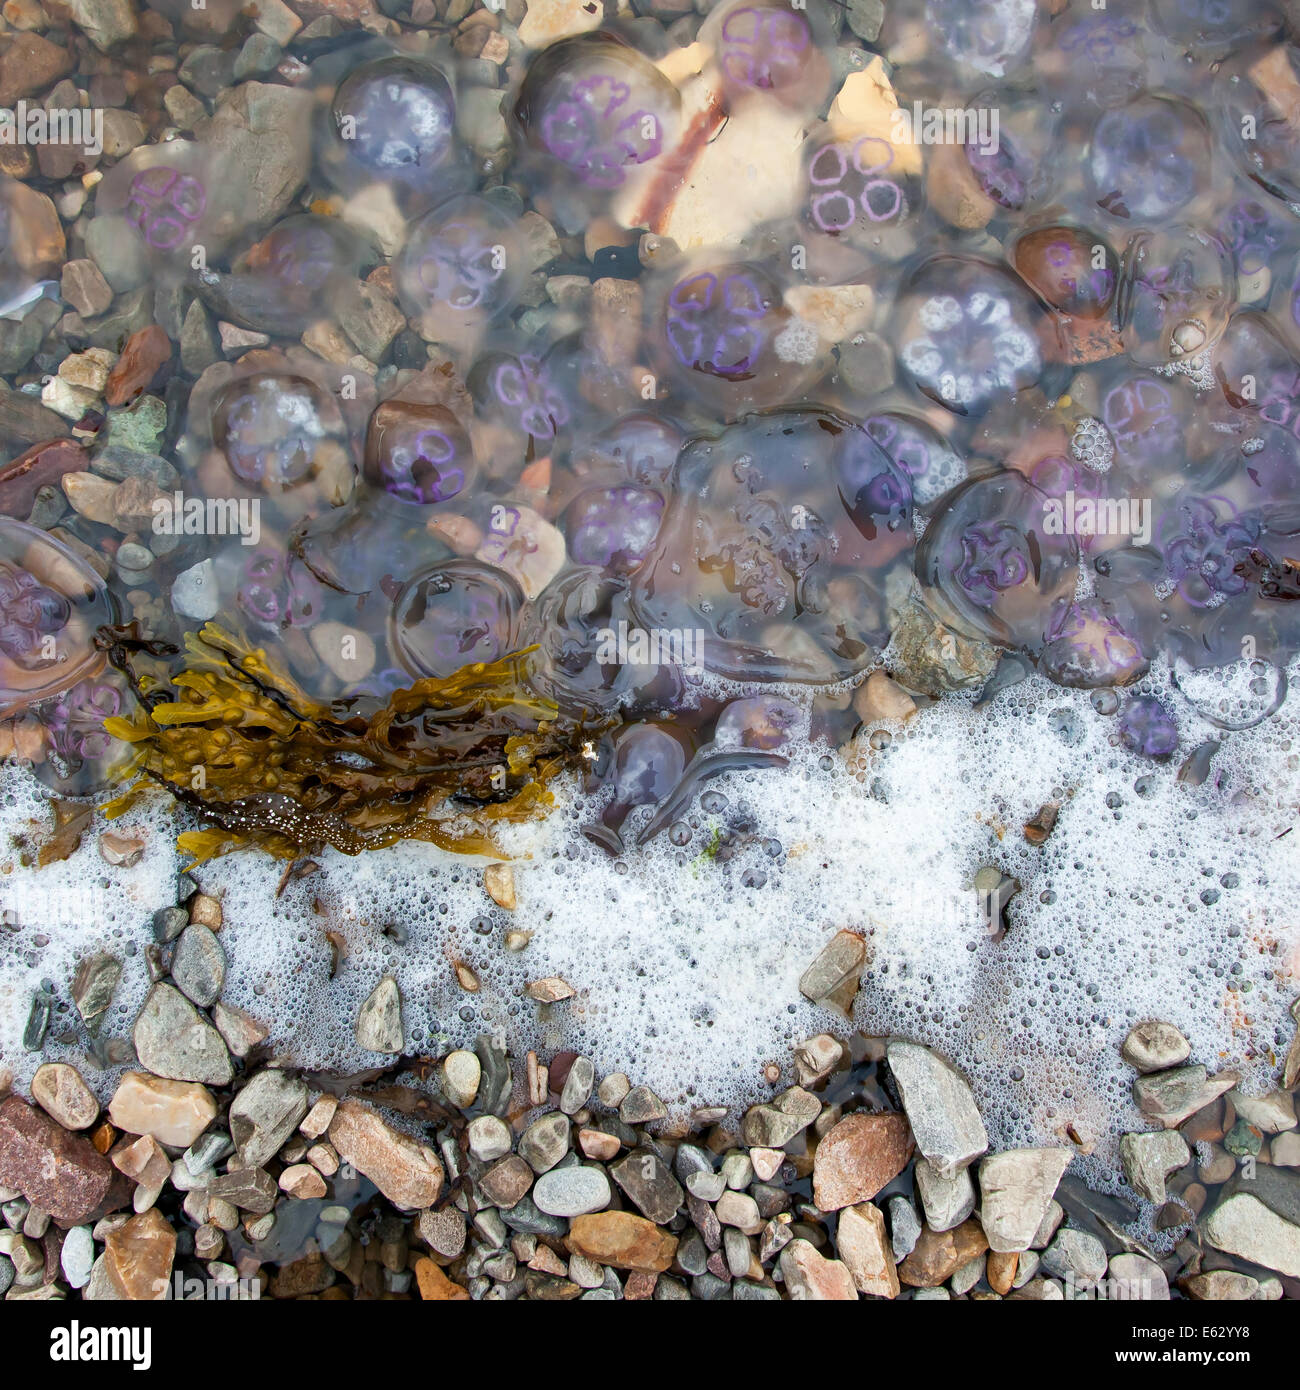 Small jellyfish washing up on a beach in Scotland Stock Photo